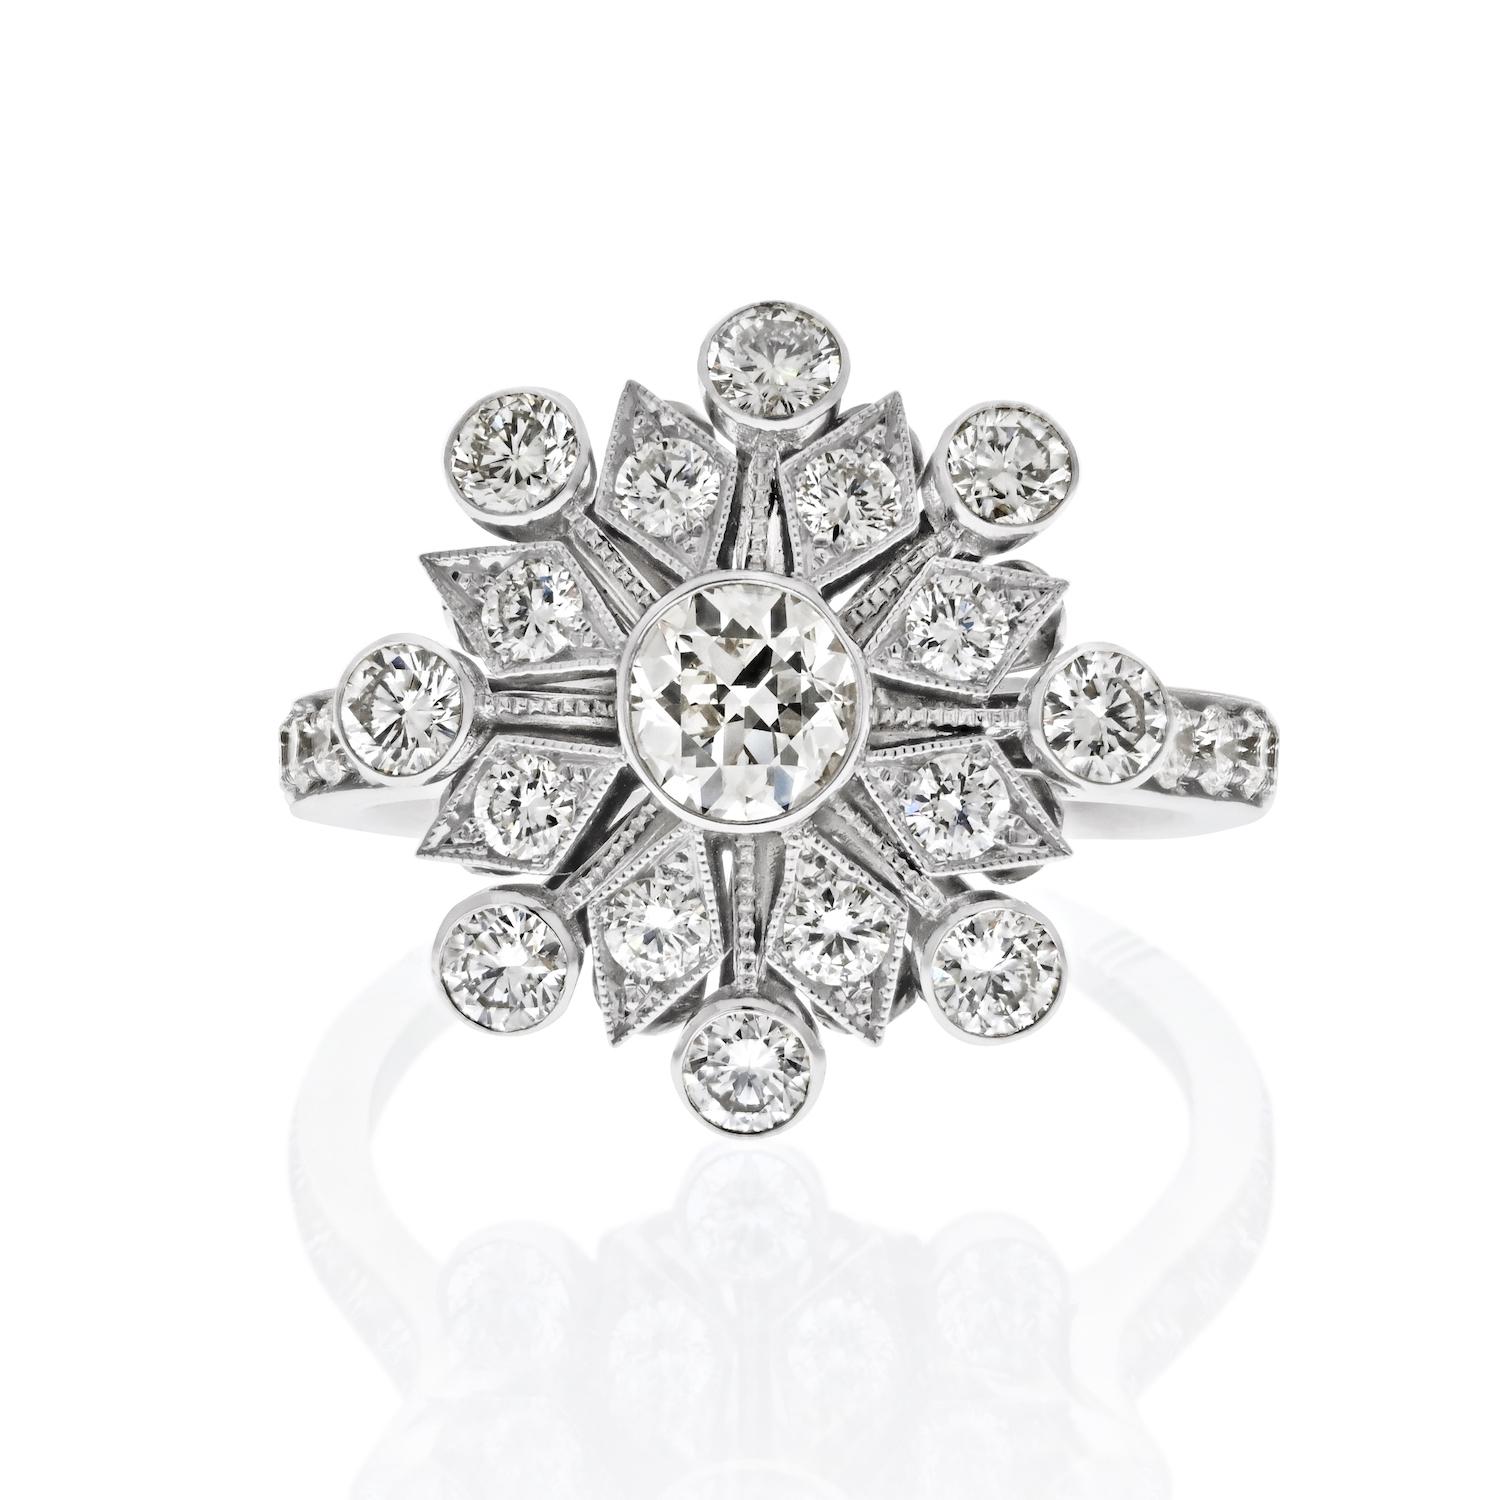 Elegance and Artistry: The Handmade Platinum Snowflake Diamond Ring.

Celebrate the art of fine jewelry with this exquisite handmade platinum diamond ring, a masterpiece of design and craftsmanship. Resembling the intricate beauty of a snowflake,